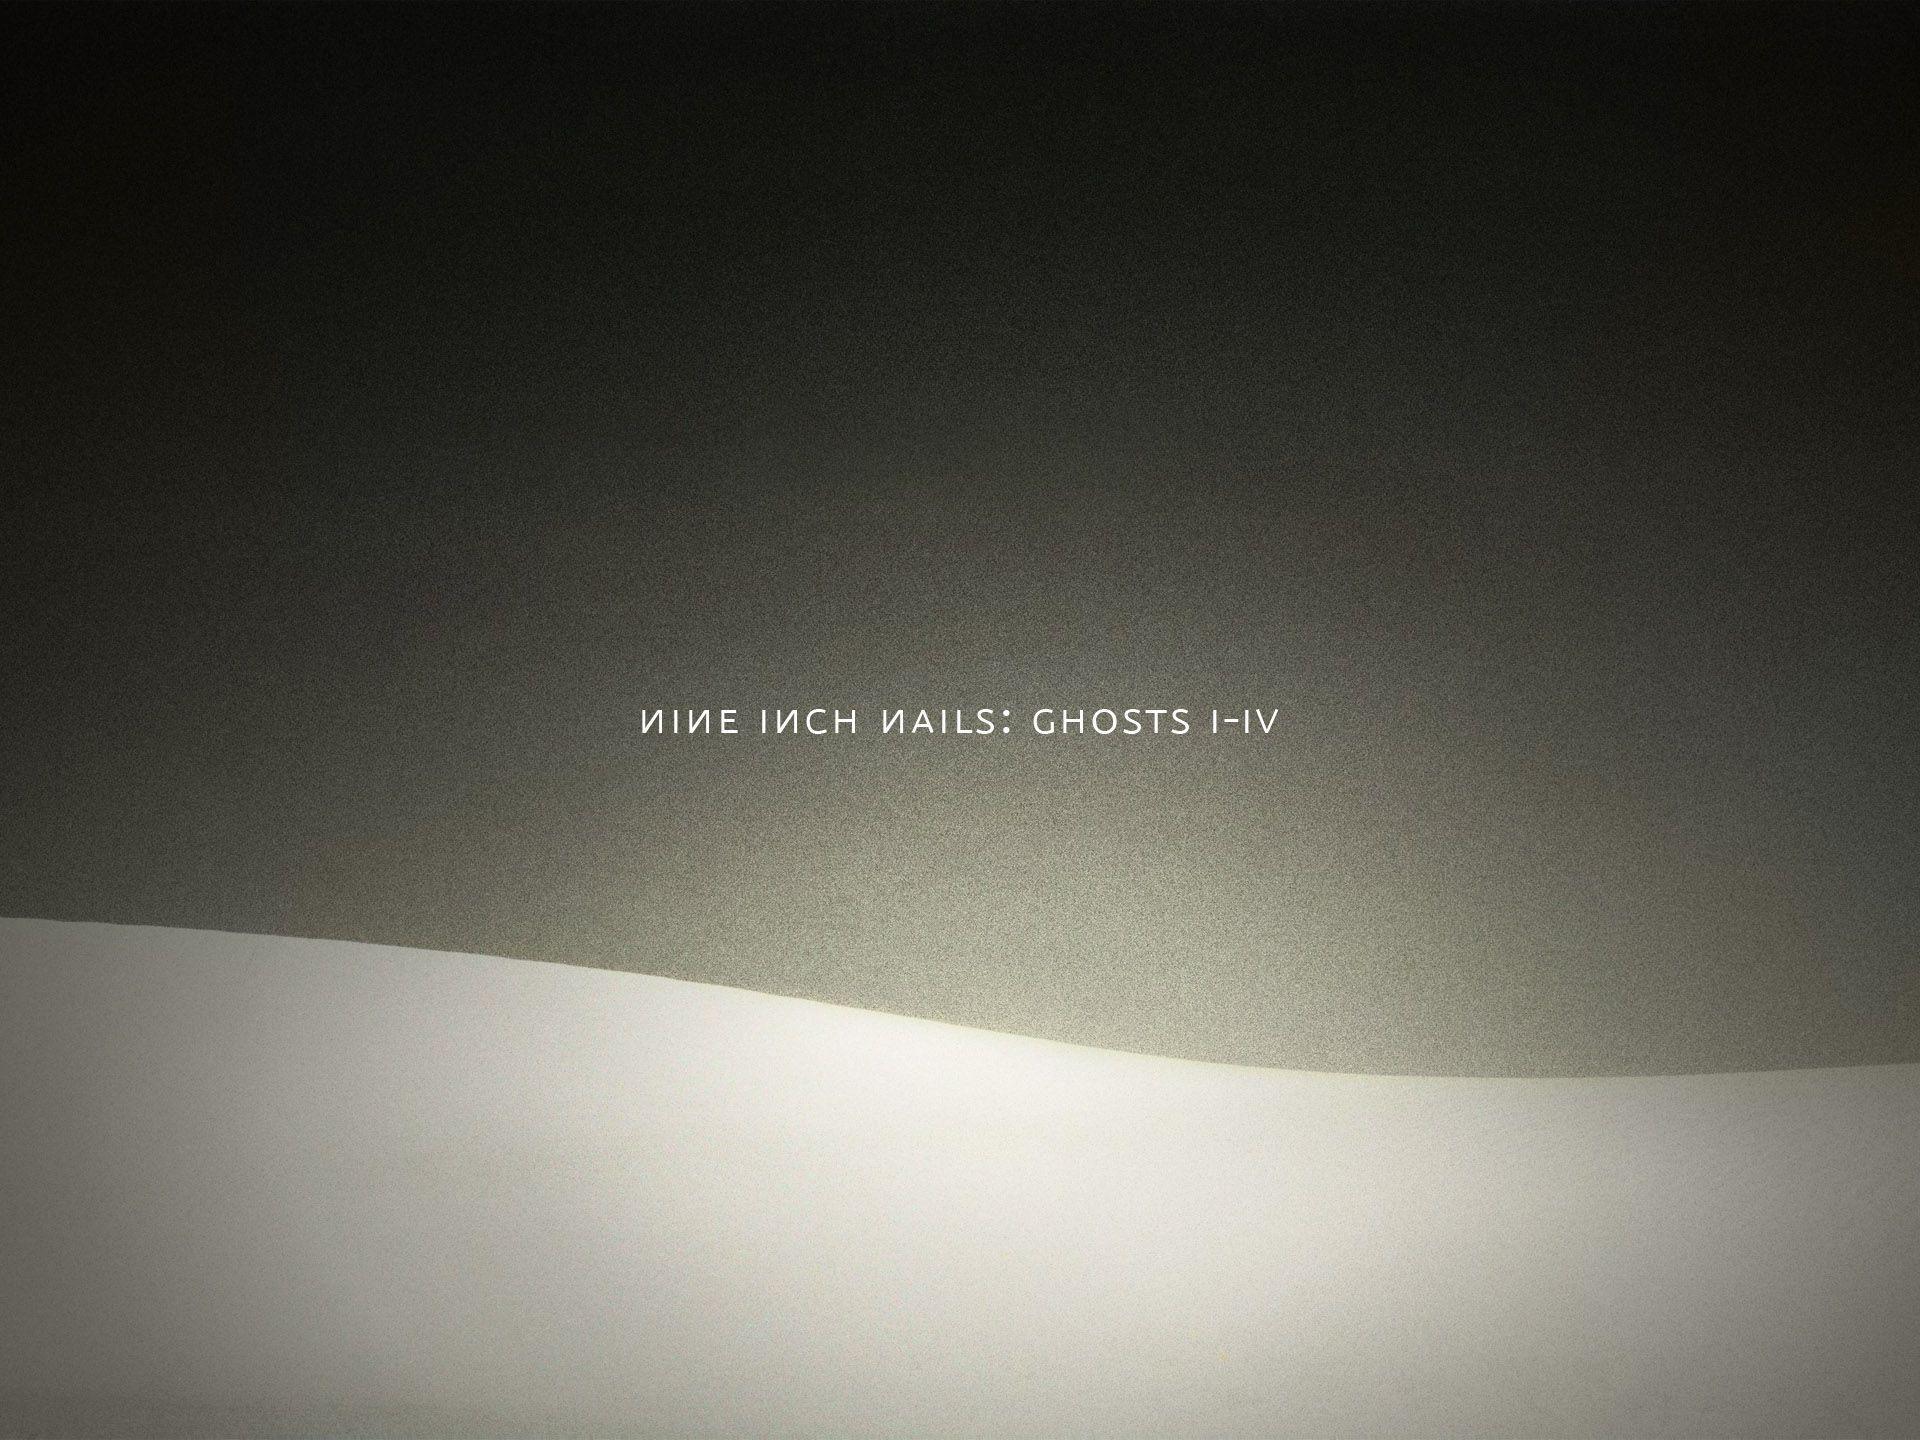 Ghosts Inch Nails Wallpaper